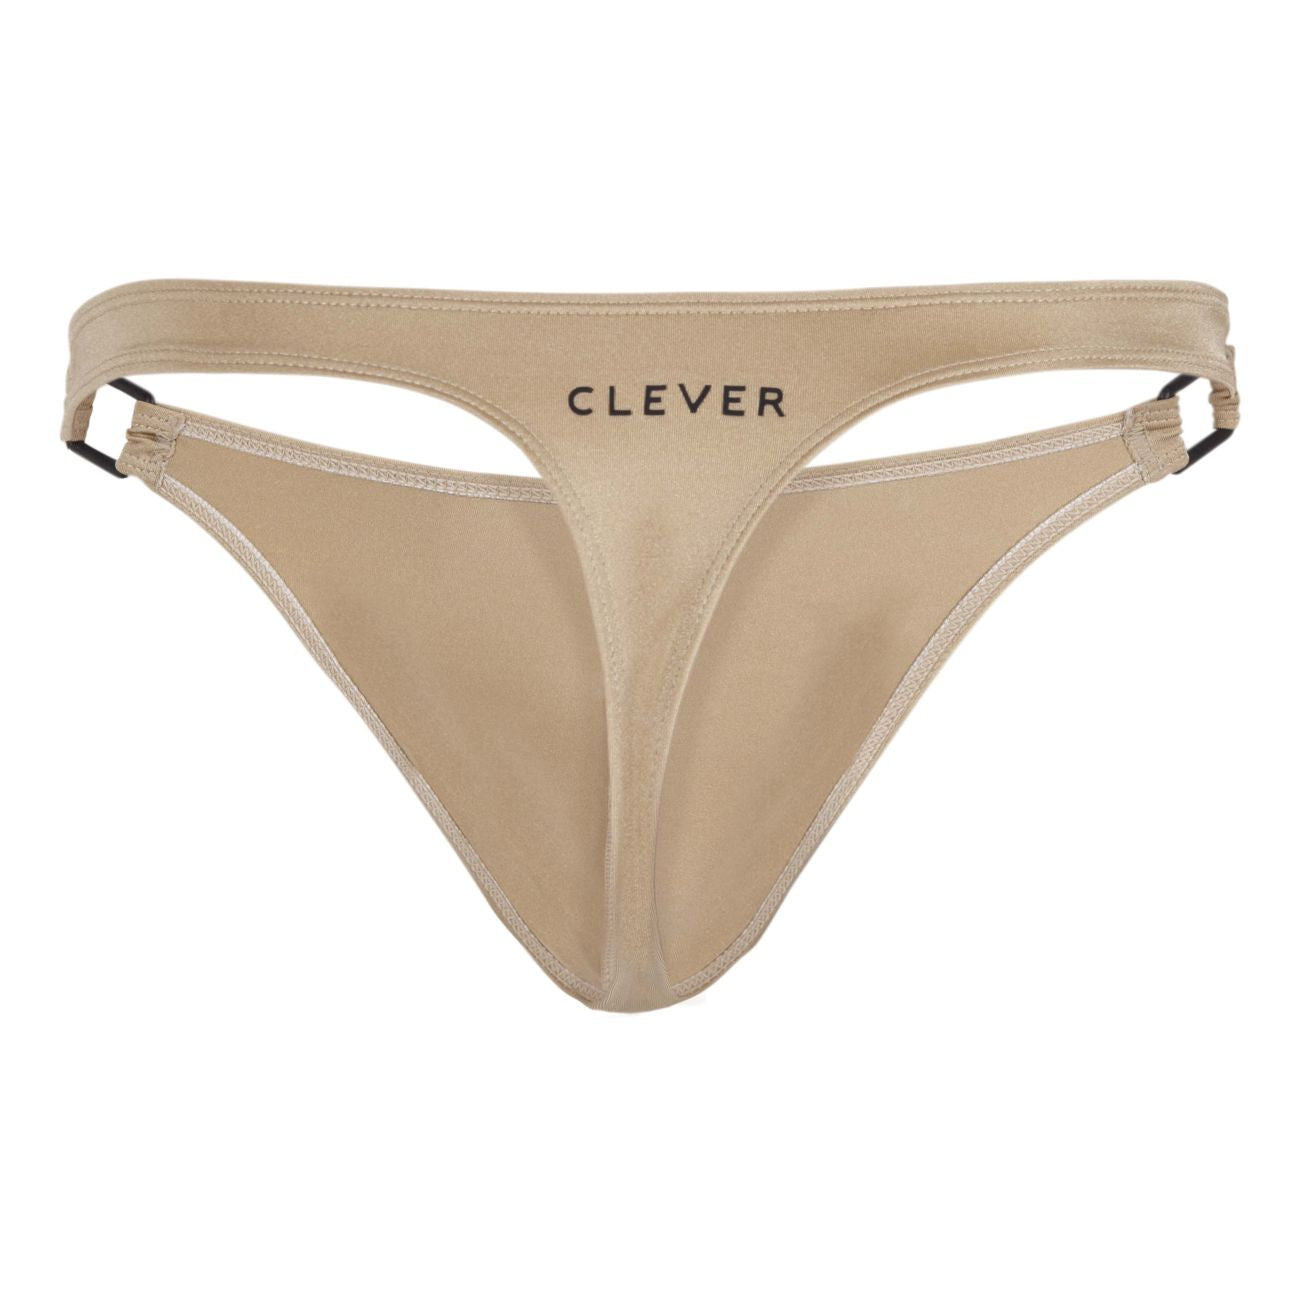 Clever Flashing Thongs